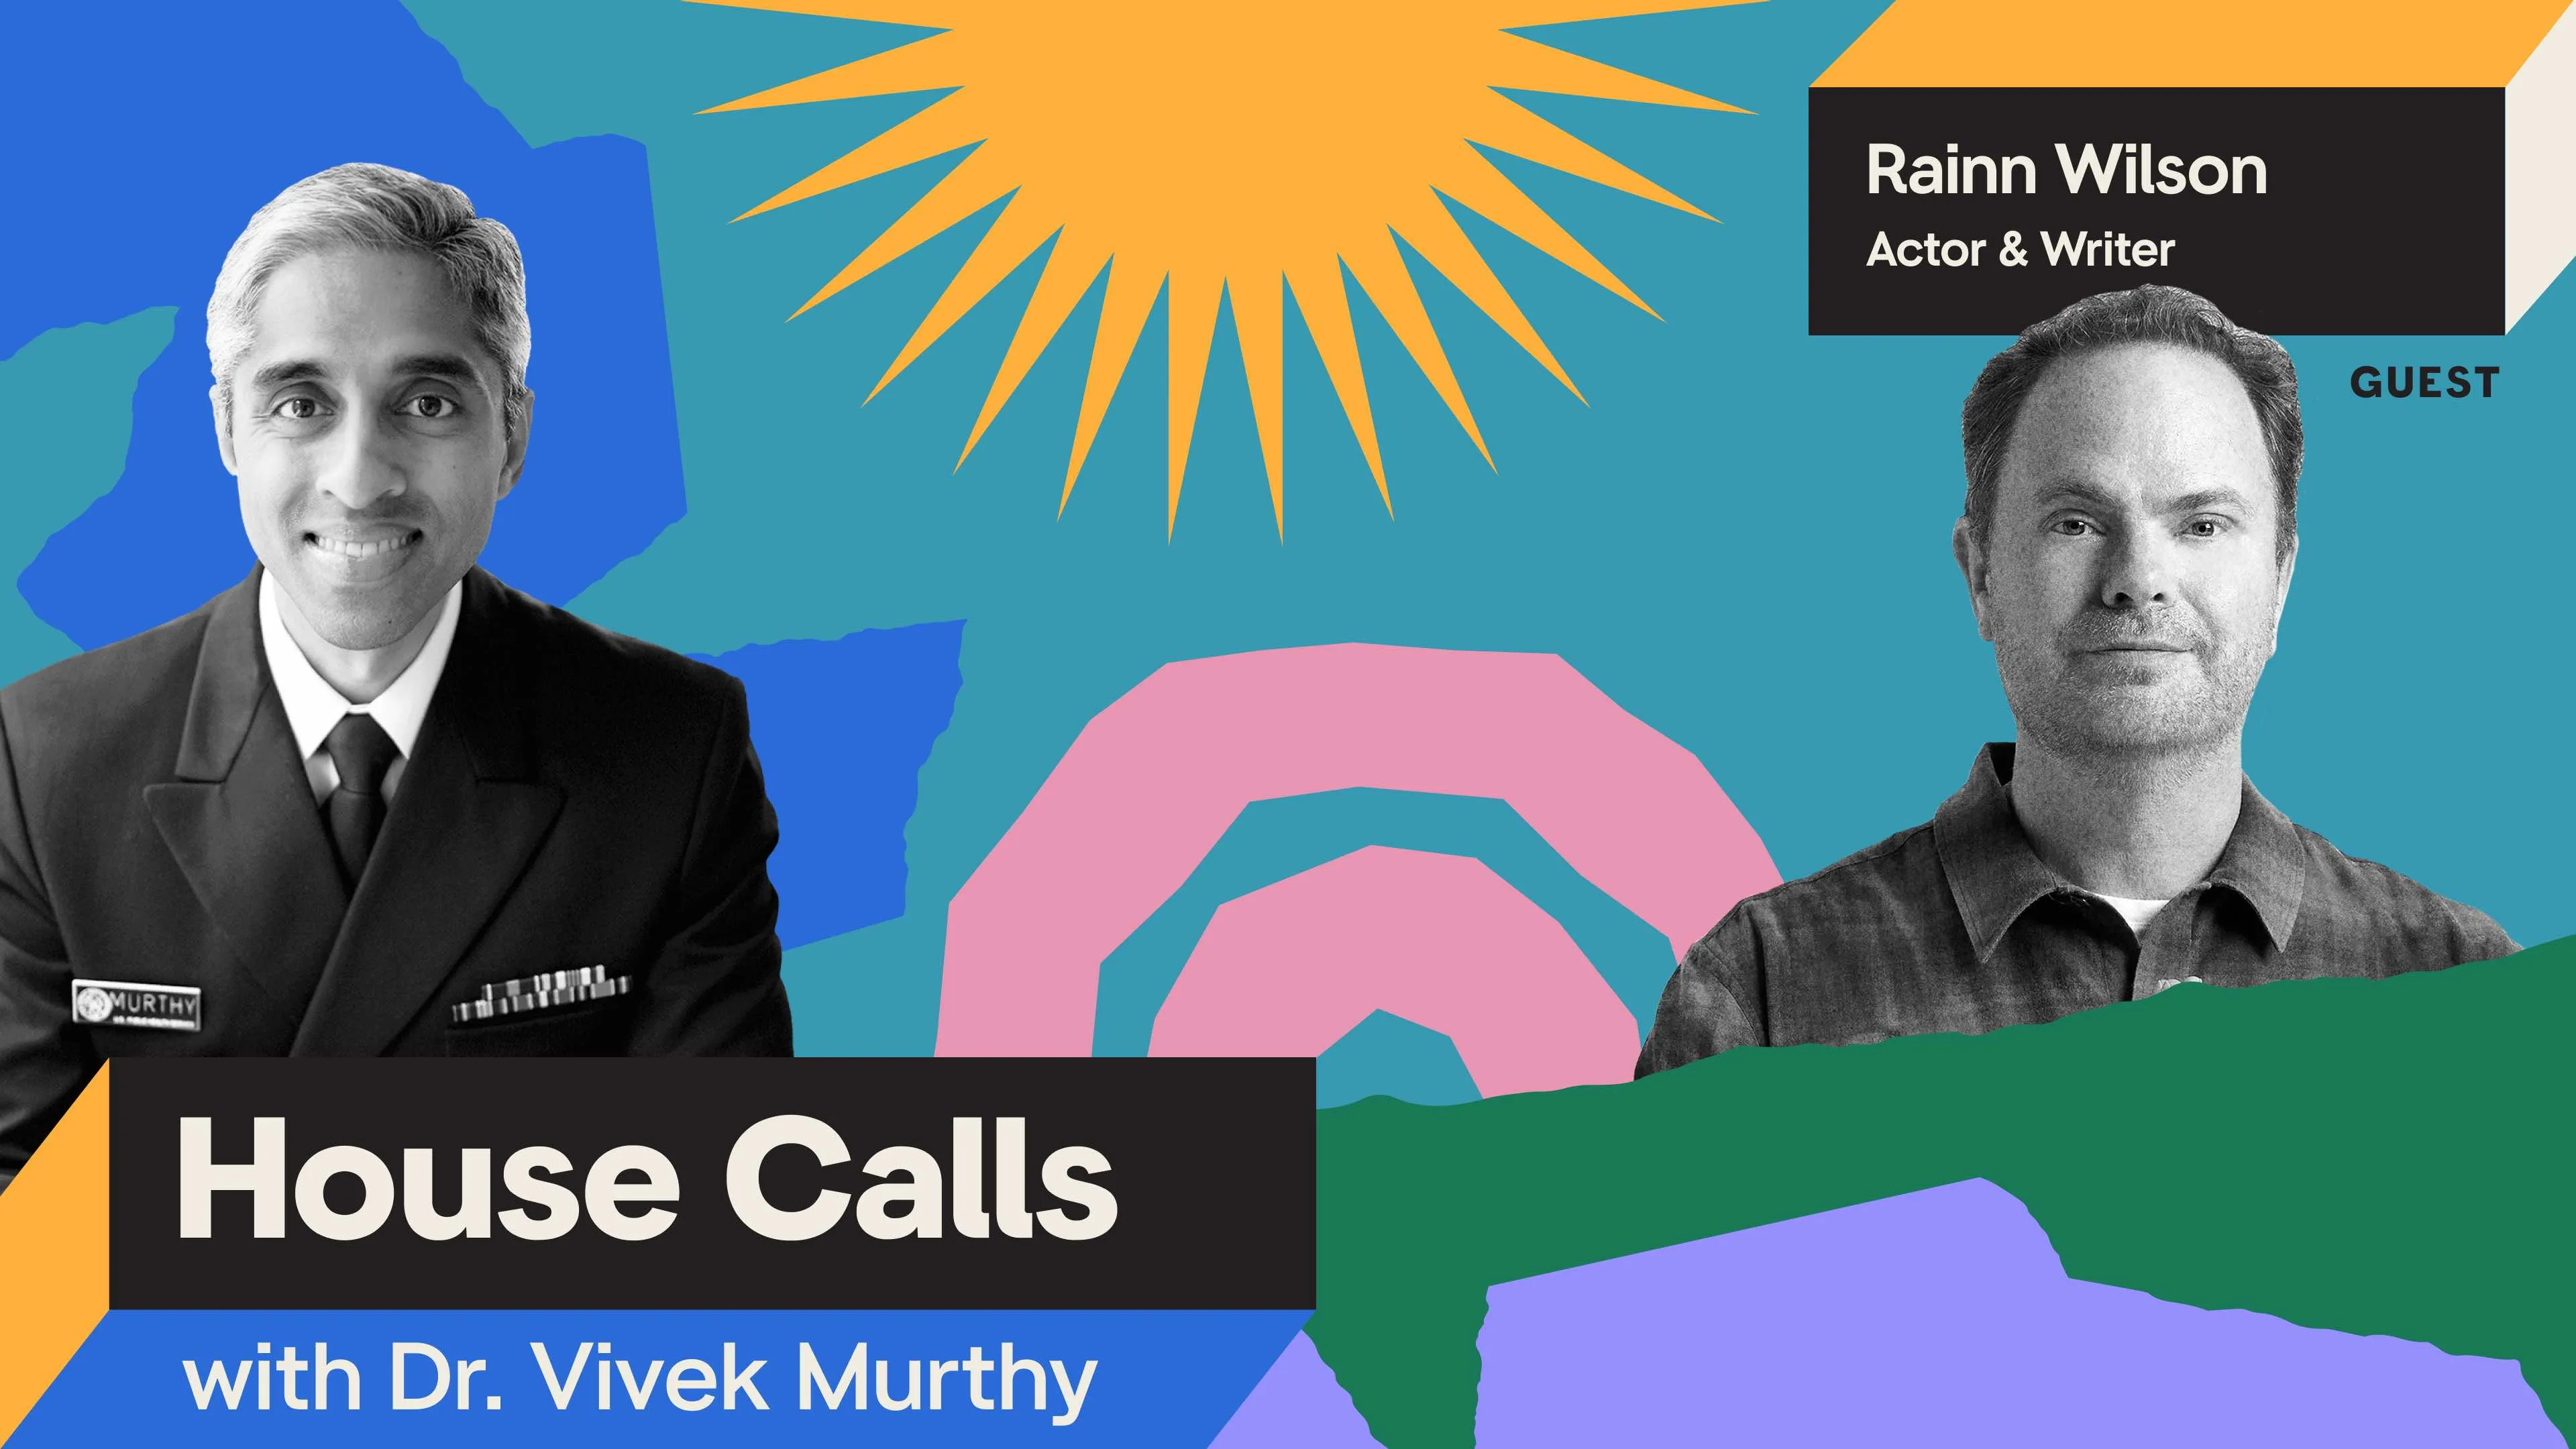 Black and white portraits of Surgeon General Vivek Murthy and Rainn Wilson with a colorful background.